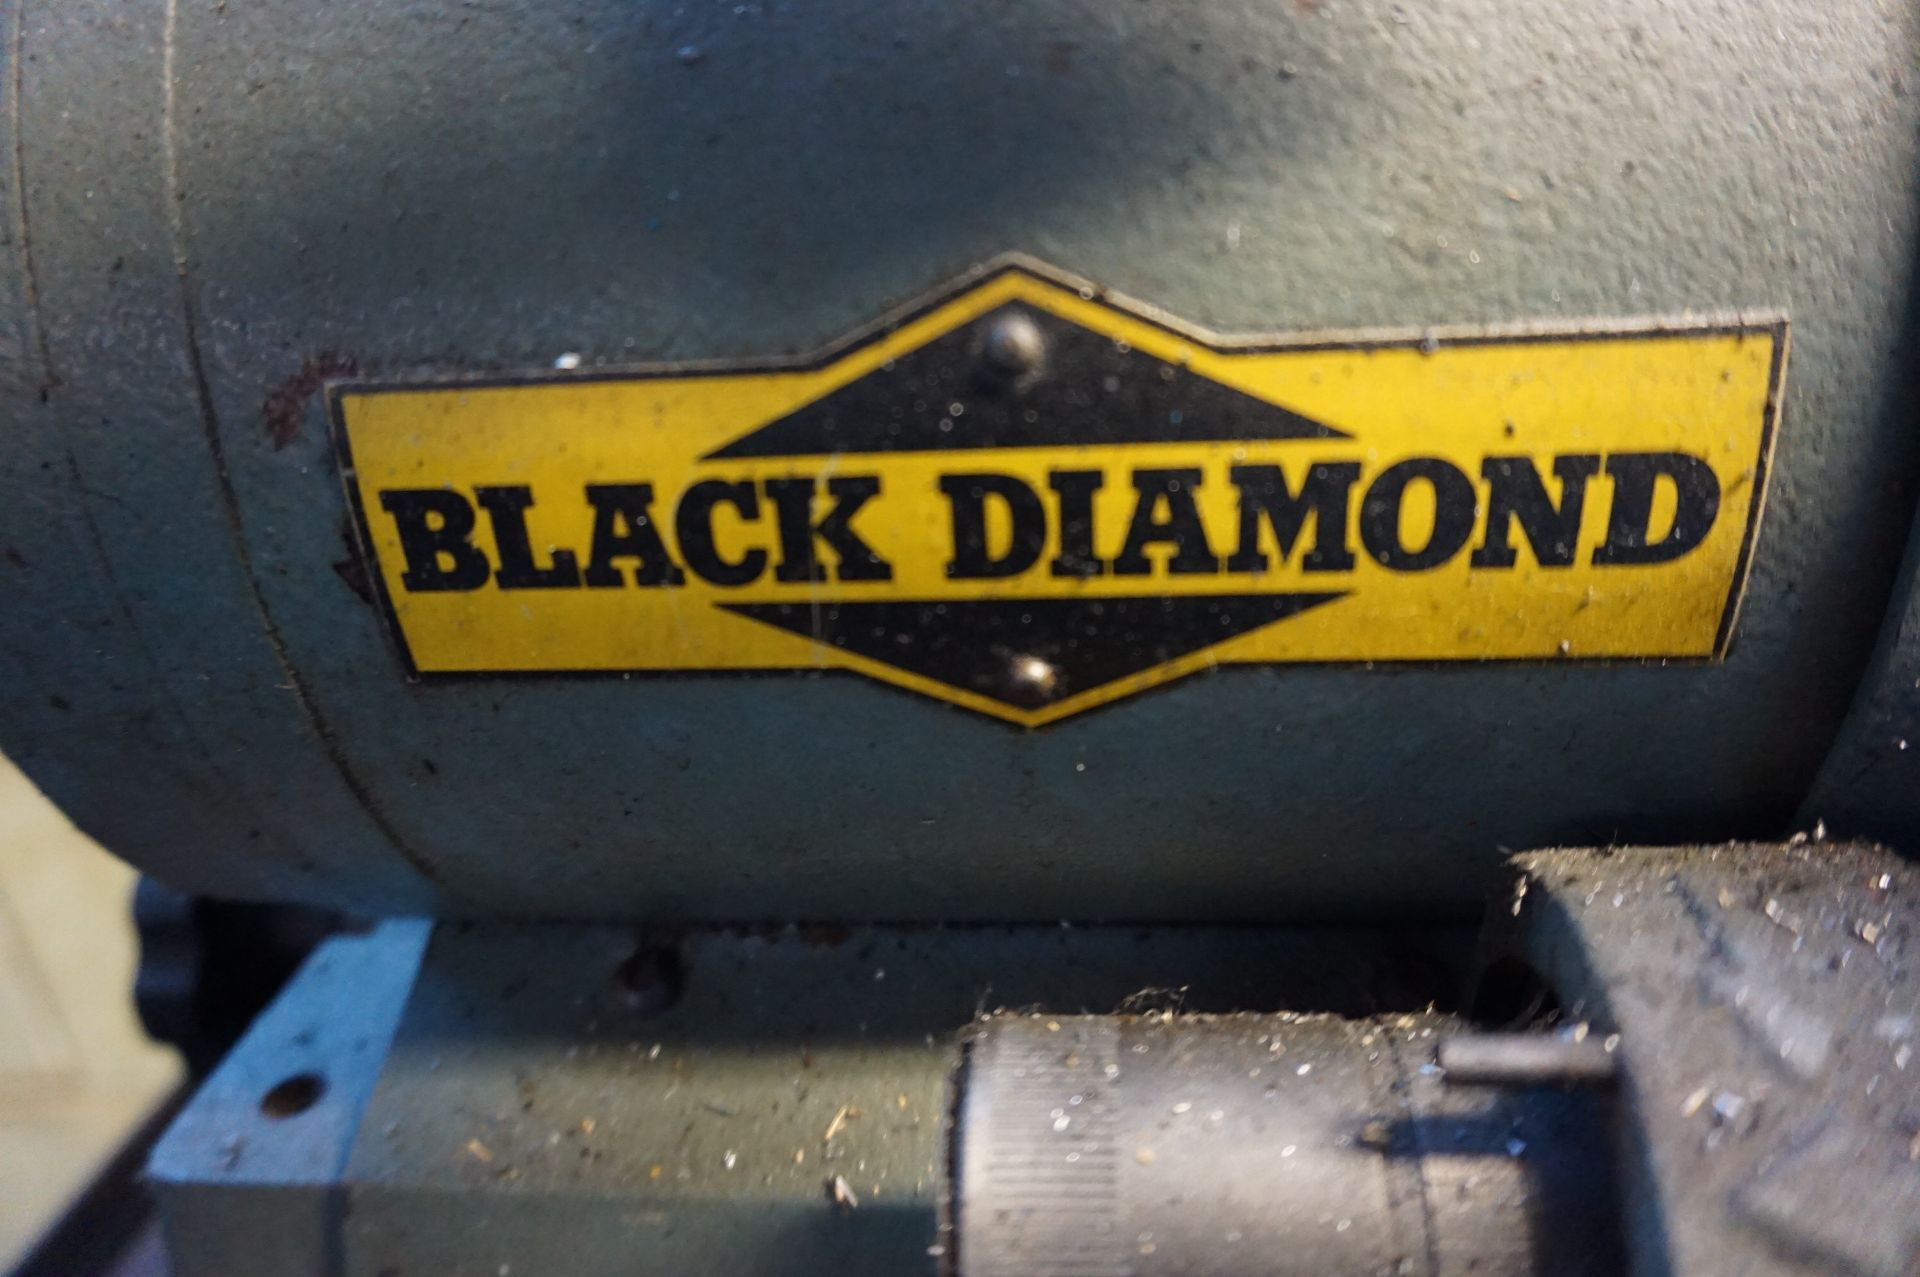 BLACK DIAMOND TABLE MOUNTED DRILL AND TOOL SHARPENER - Image 3 of 5